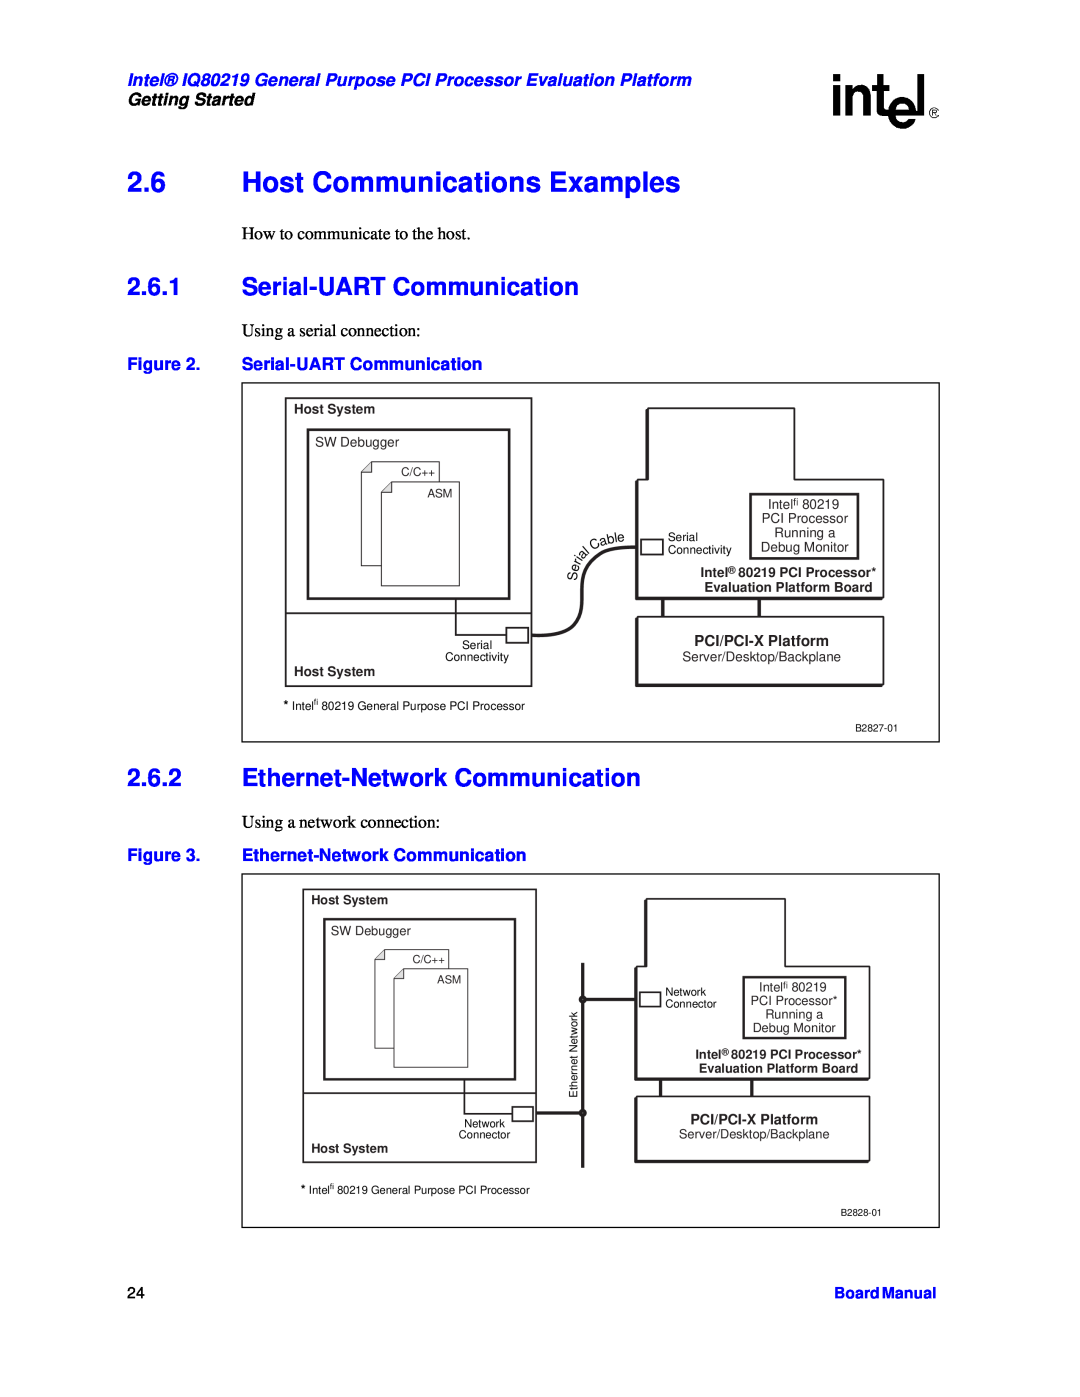 Intel IQ80219 Host Communications Examples, Serial-UART Communication, Ethernet-Network Communication, Getting Started 